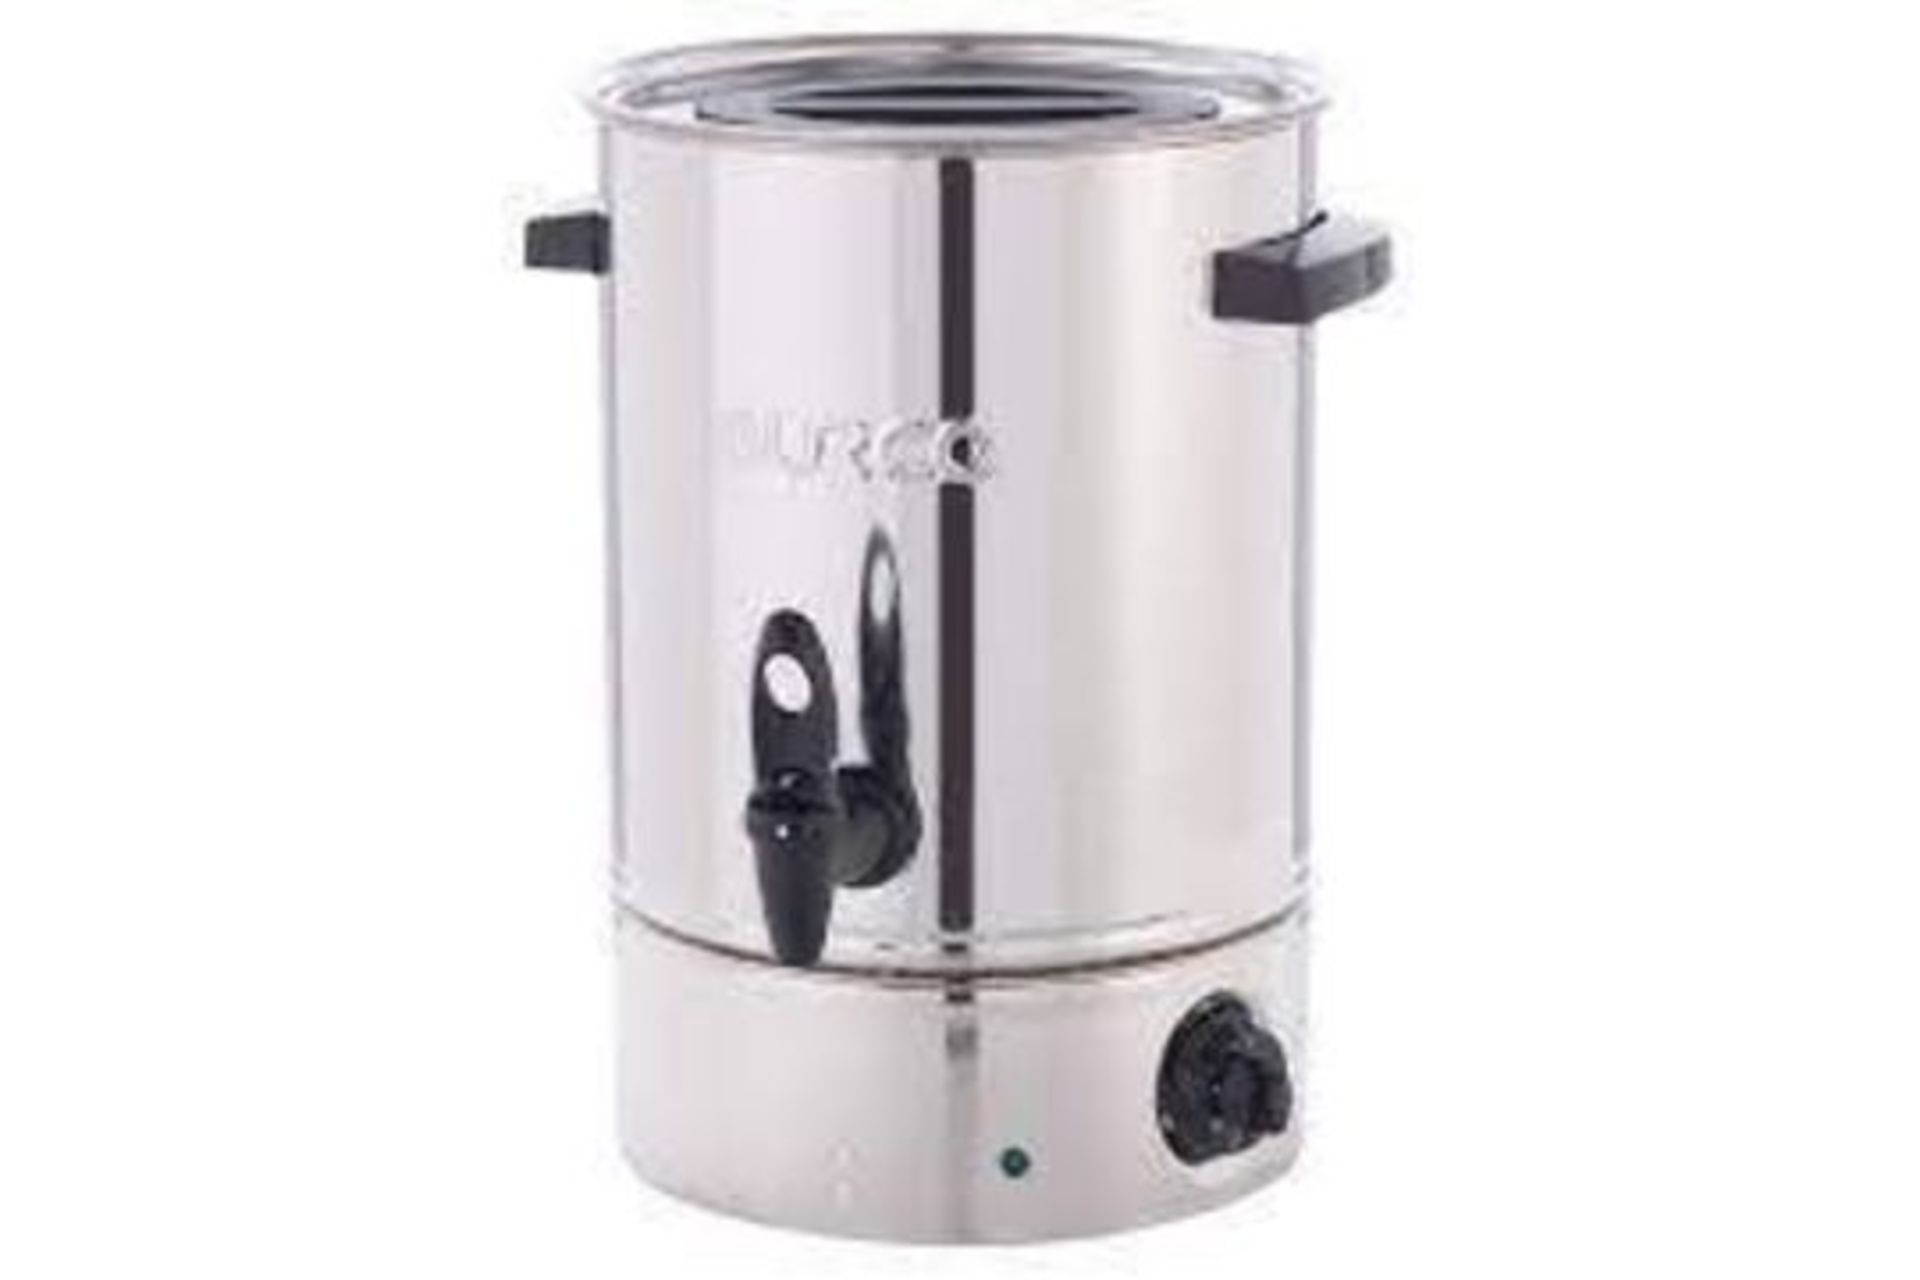 New & Boxed Cygnet Stainless Steel Electric Water Boiler 9L. (PALLET 150368536) With a 36 large